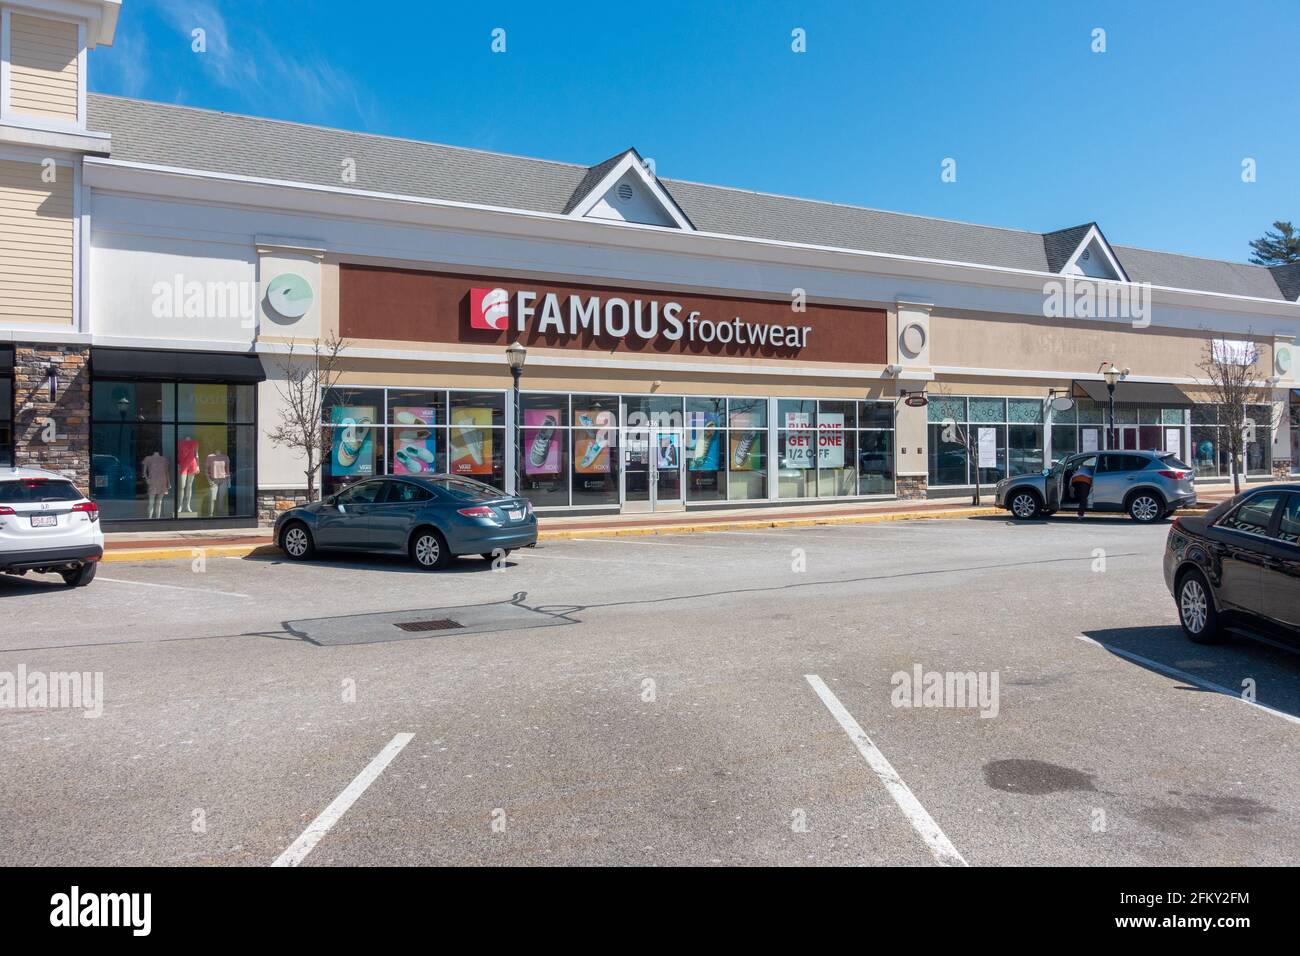 Famous Footwear Retail Chain for Shoes Storefront at Wareham Crossing, Wareham, Massachusetts USA Stock Photo